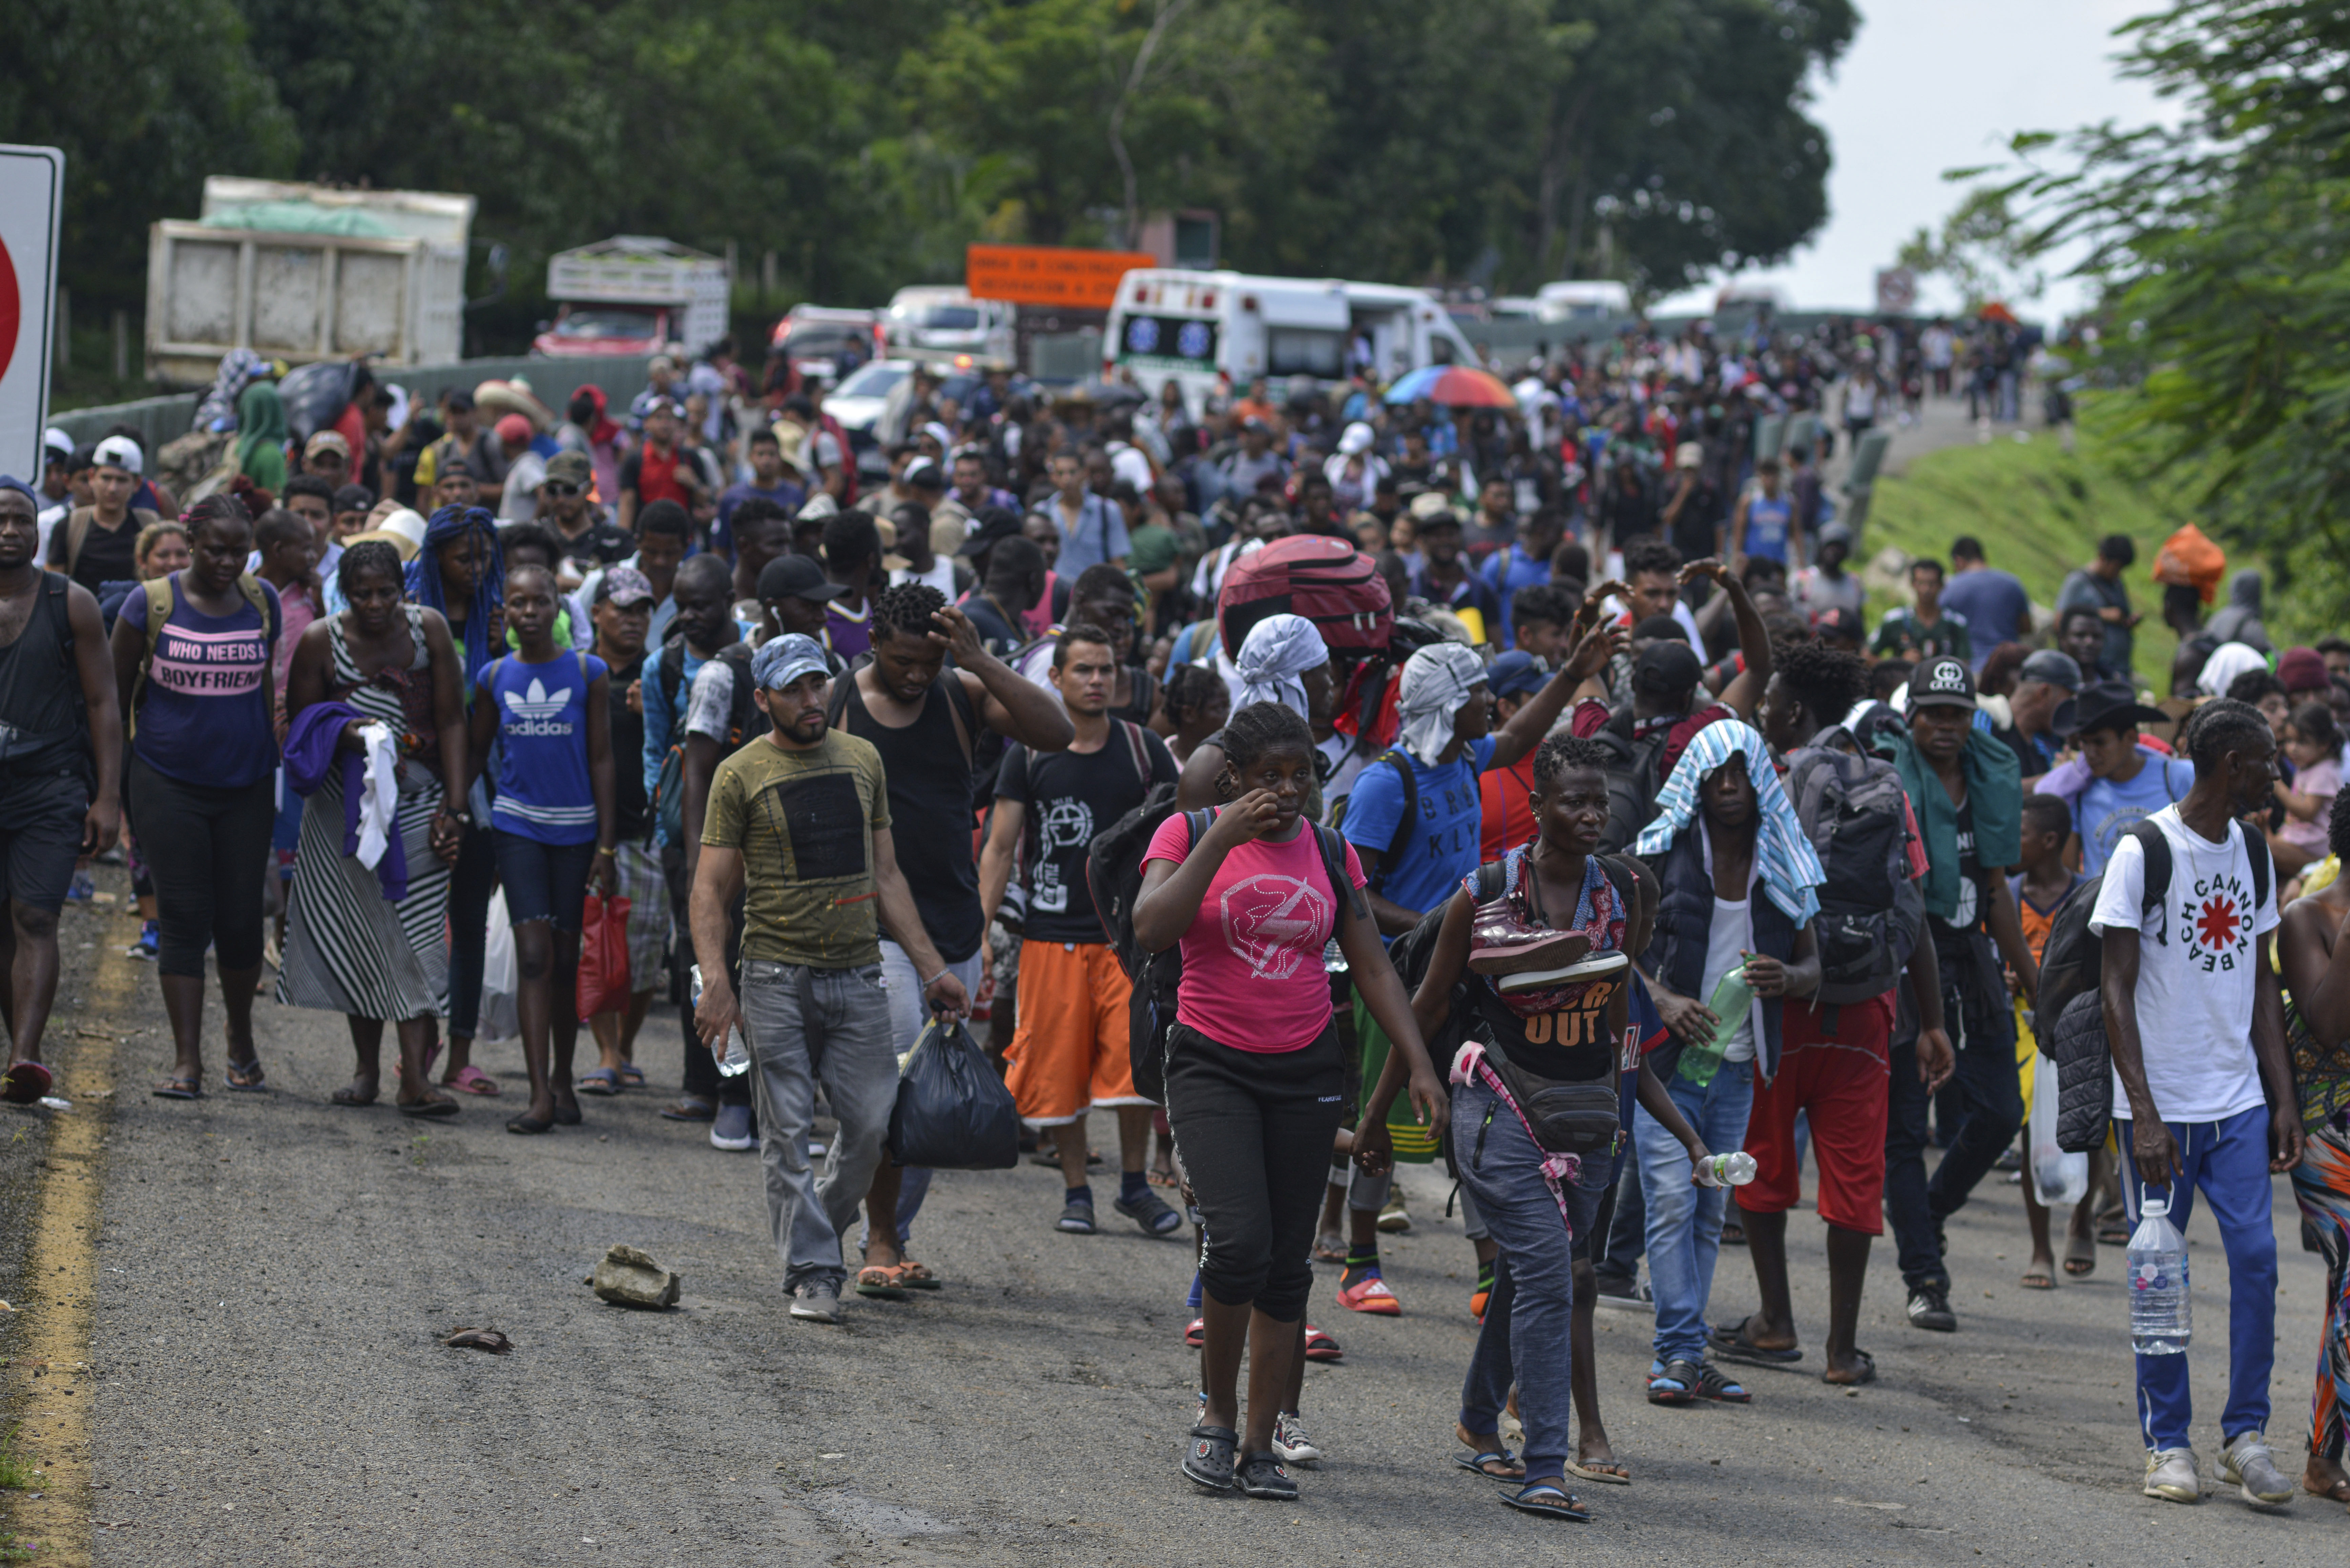 Migrants walk down Highway 200 en route to Huixtla near Tapachula, Chiapas state, Mexico, Saturday Oct. 12, 2019. Migrants from Africa, Cuba, Haiti, and other Central American countries set off early morning by foot from Tapachula to the southern border of the United States. (AP Photo/Isabel Mateos)